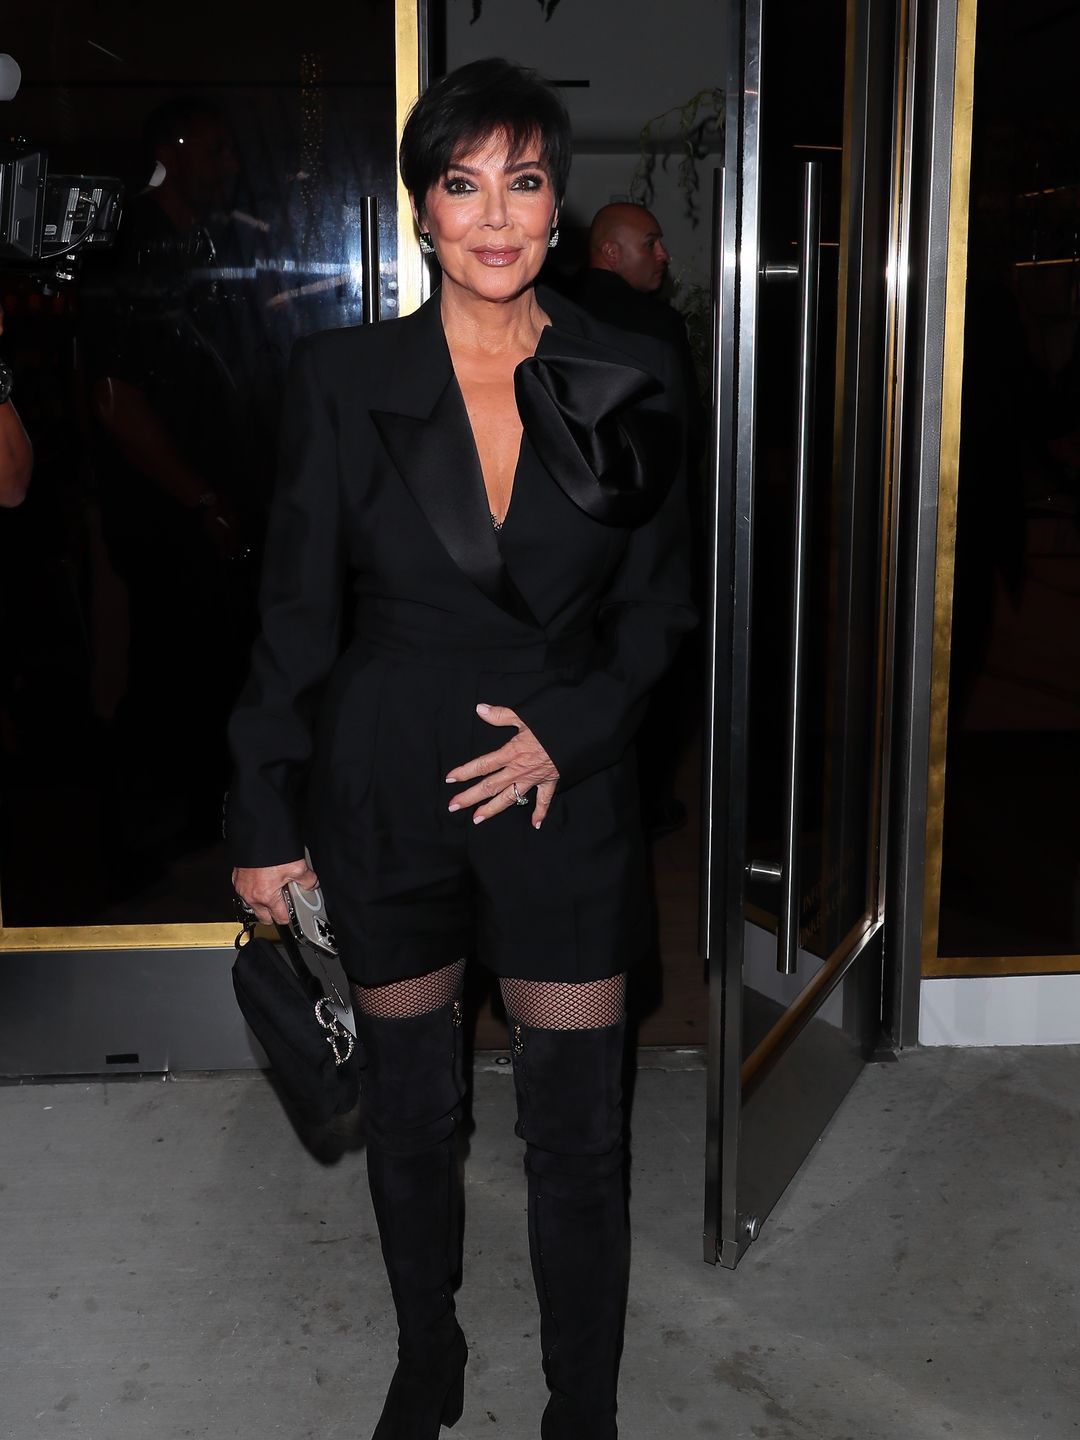 Mom-ager Kris steps out in an all black ensemble paired with a diamond adorned Dior saddle bag to celebrate 